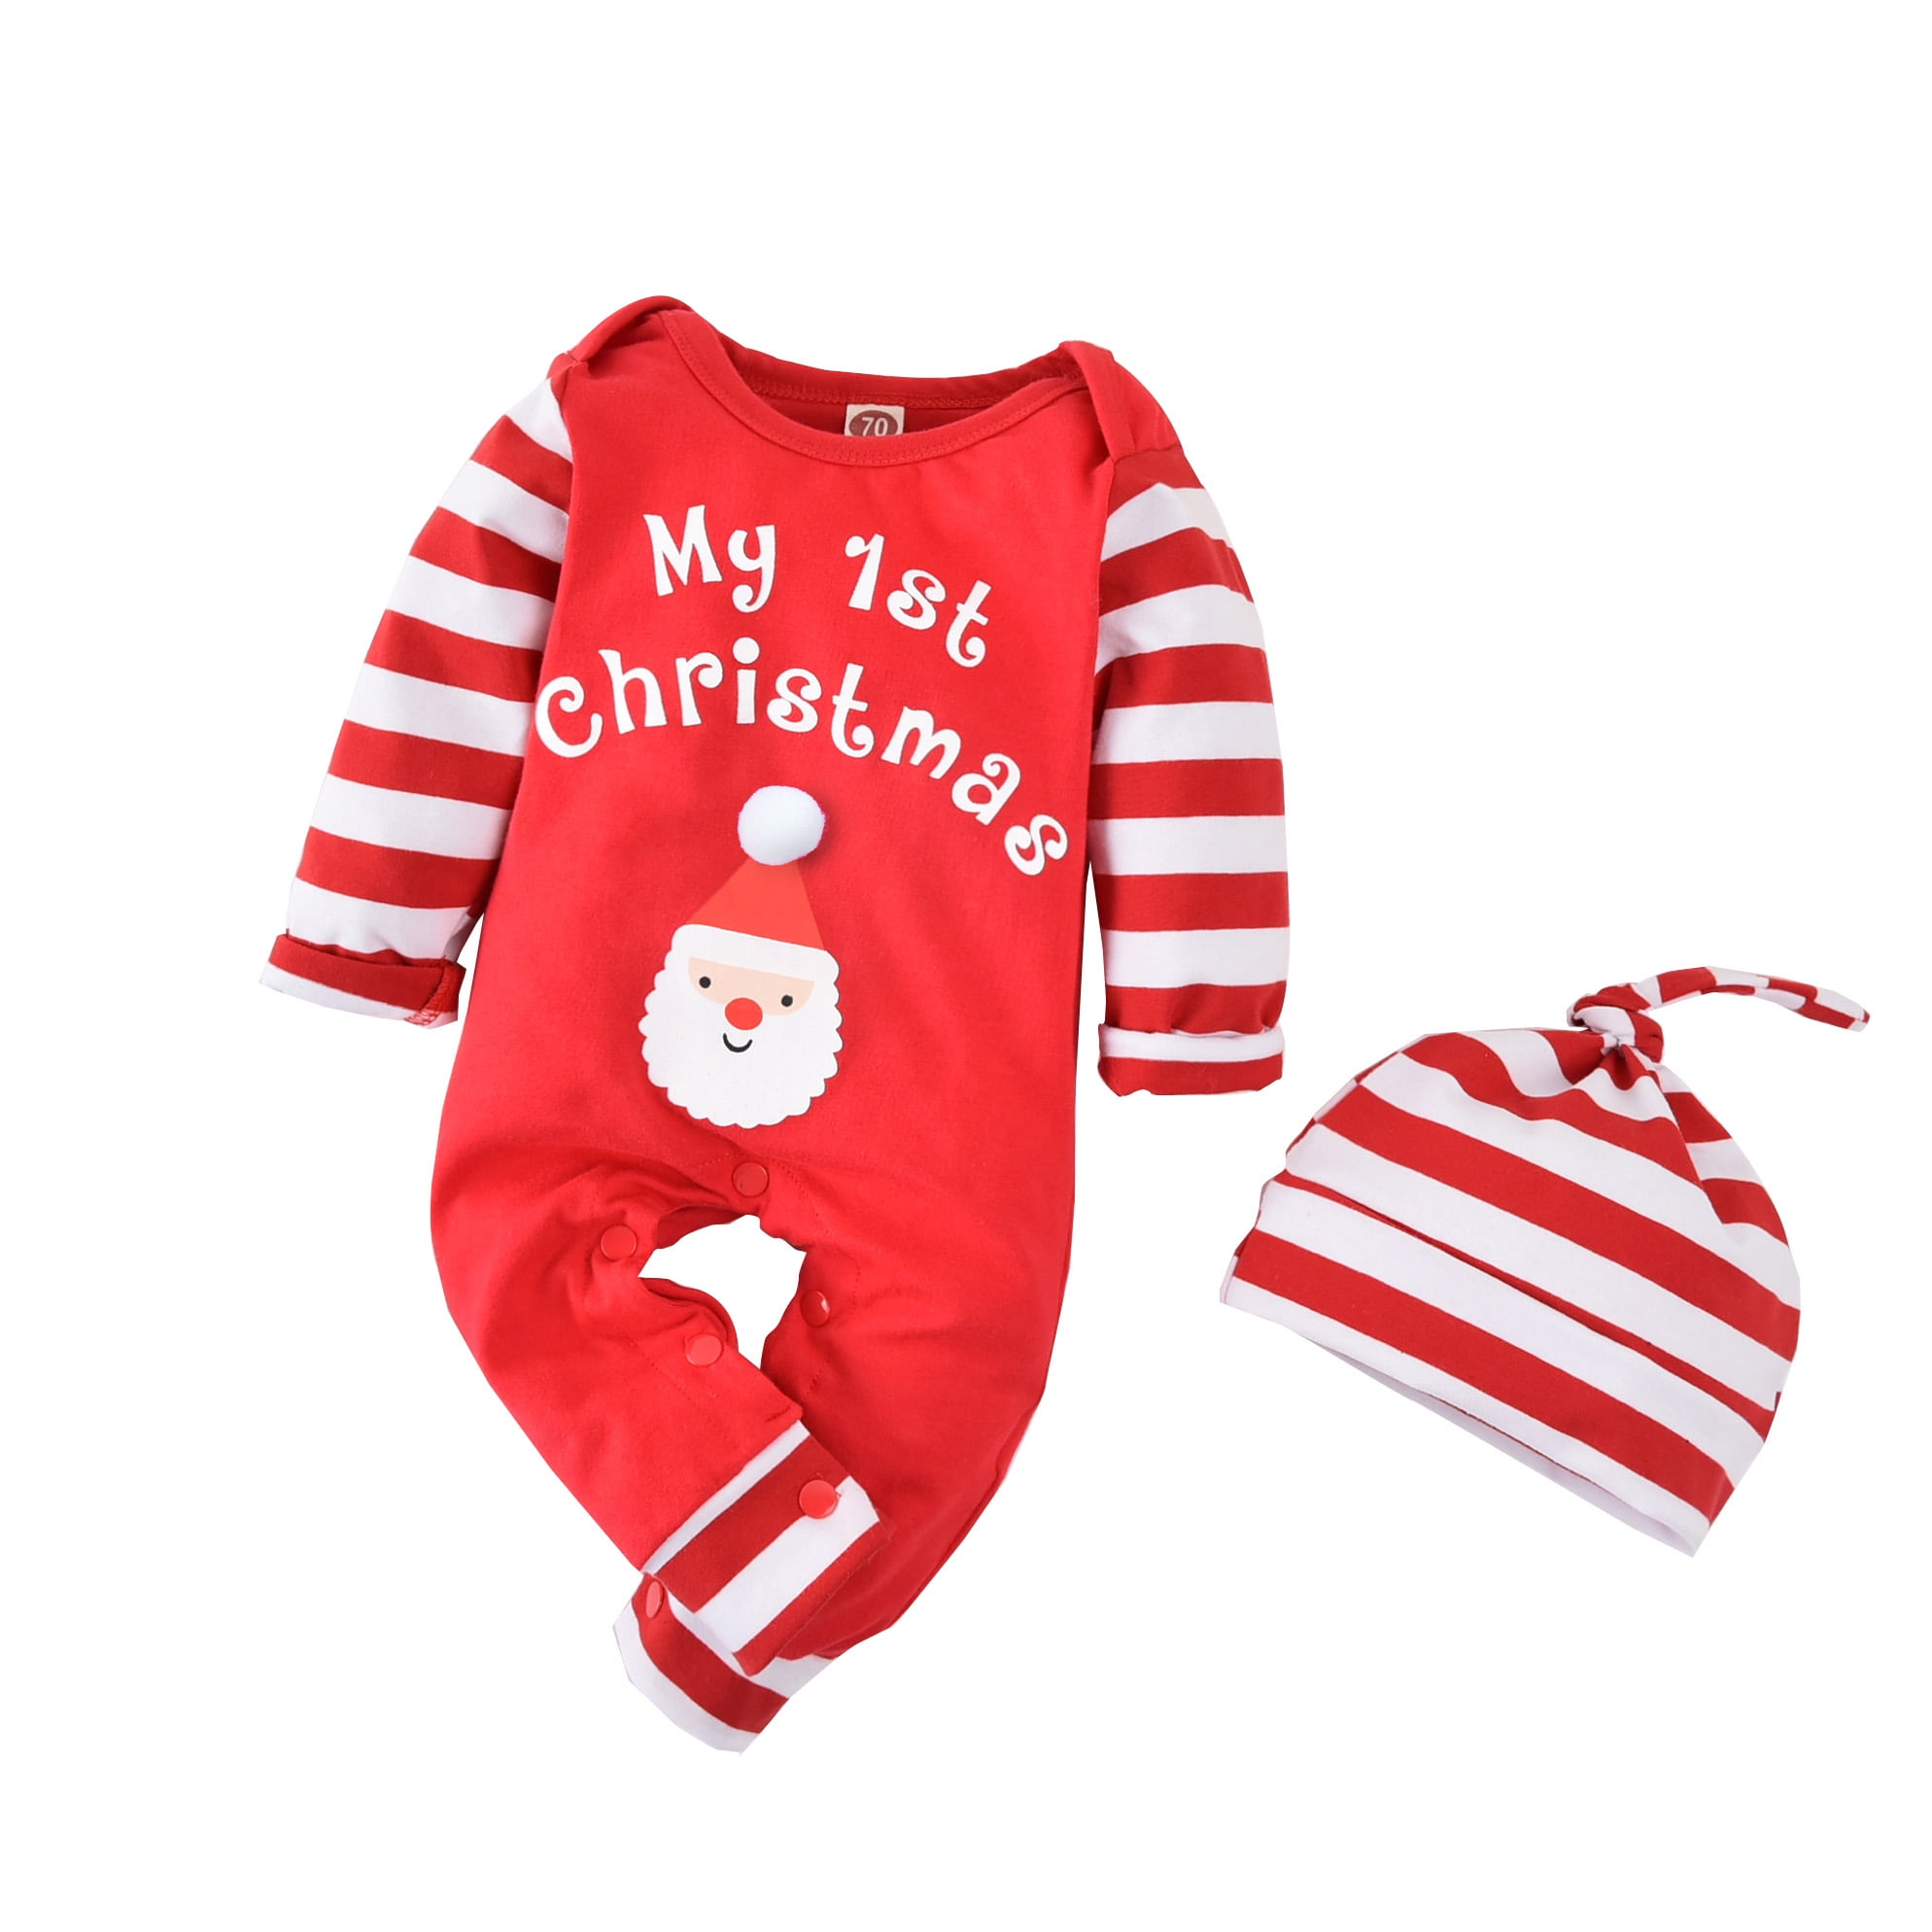 Camlinbo Christmas Outfit Baby Girls Boys My First Christmas Romper Toddler Onesies 6Pcs Bodysuit with Santa Hat